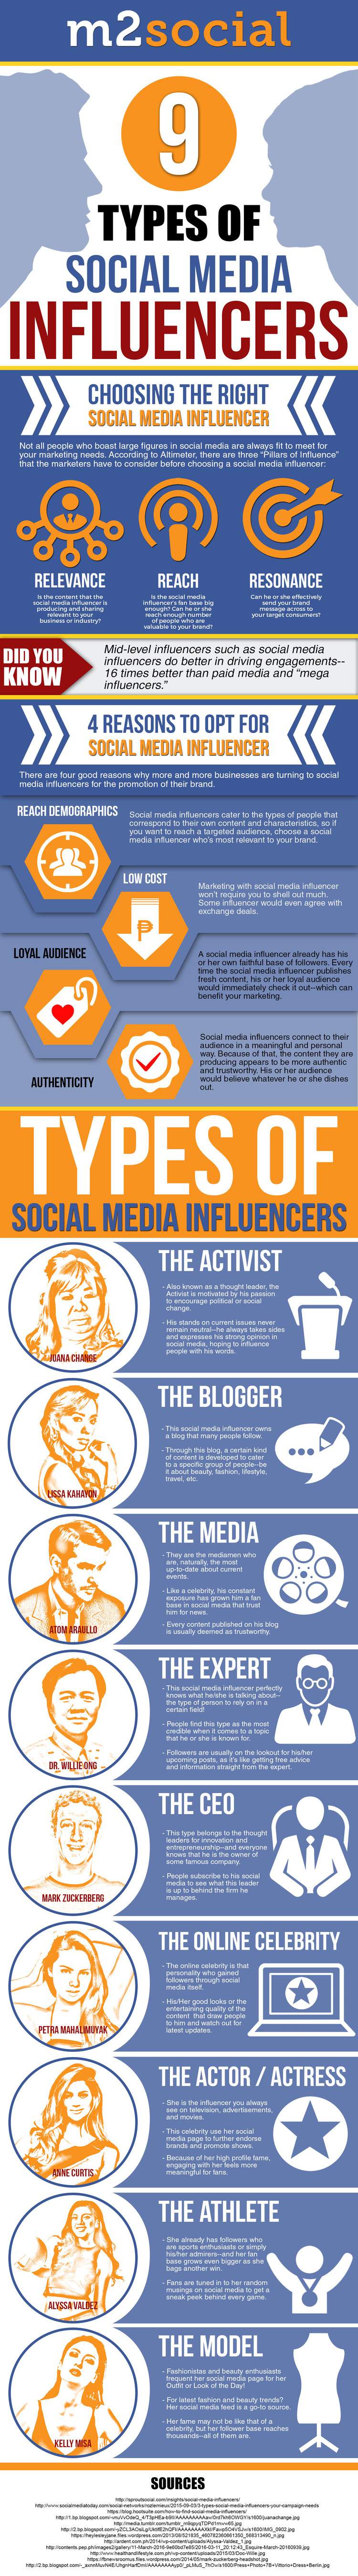 types-of-social-media-influencers